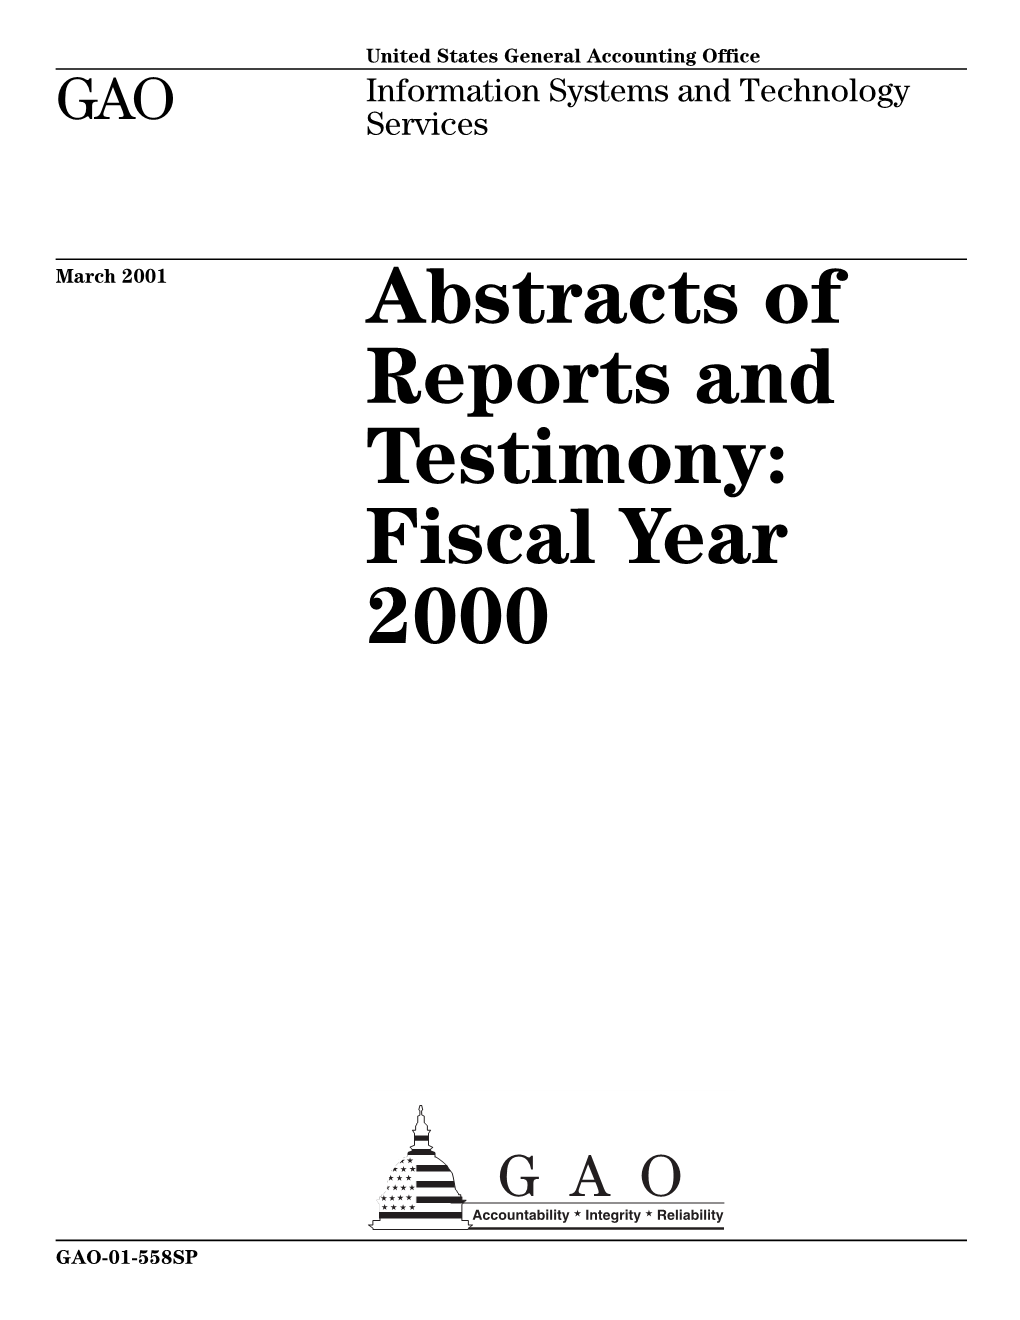 GAO-01-558SP Abstracts of Reports and Testimony: Fiscal Year 2000